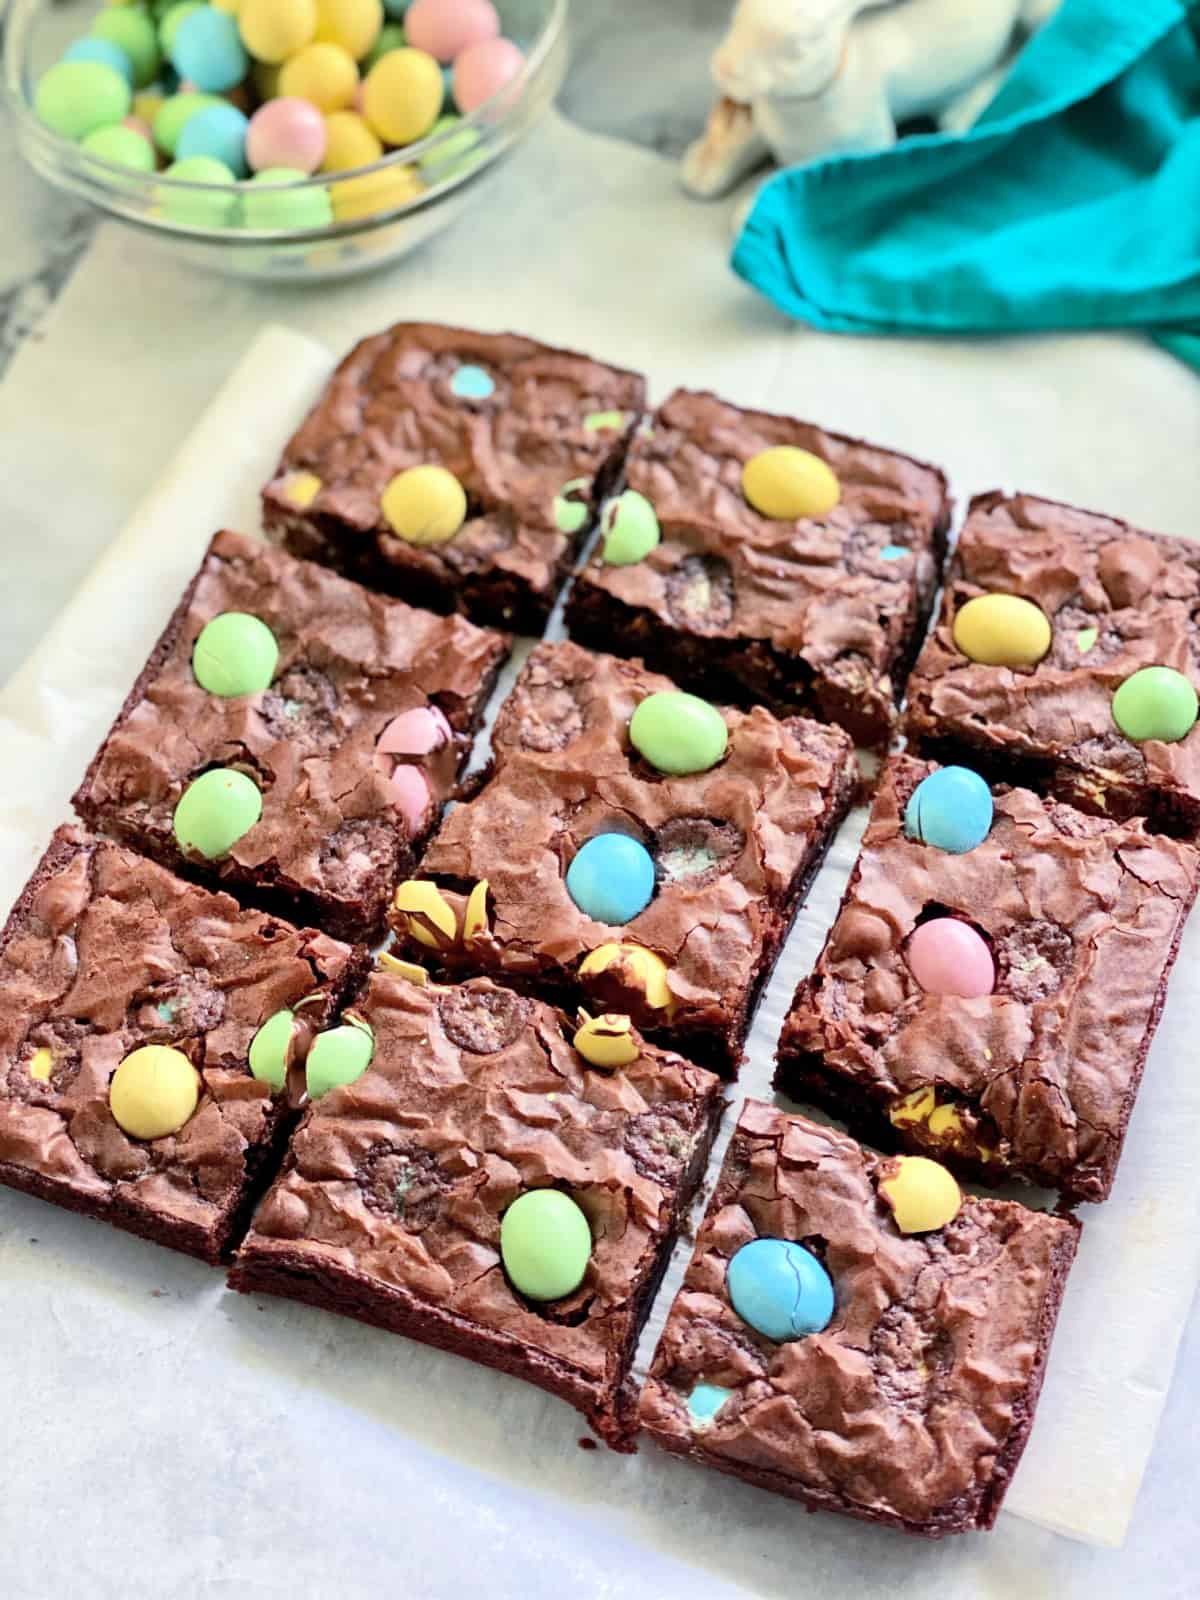 9 cut brownies with pastel egg candies in them on a marble countertop.